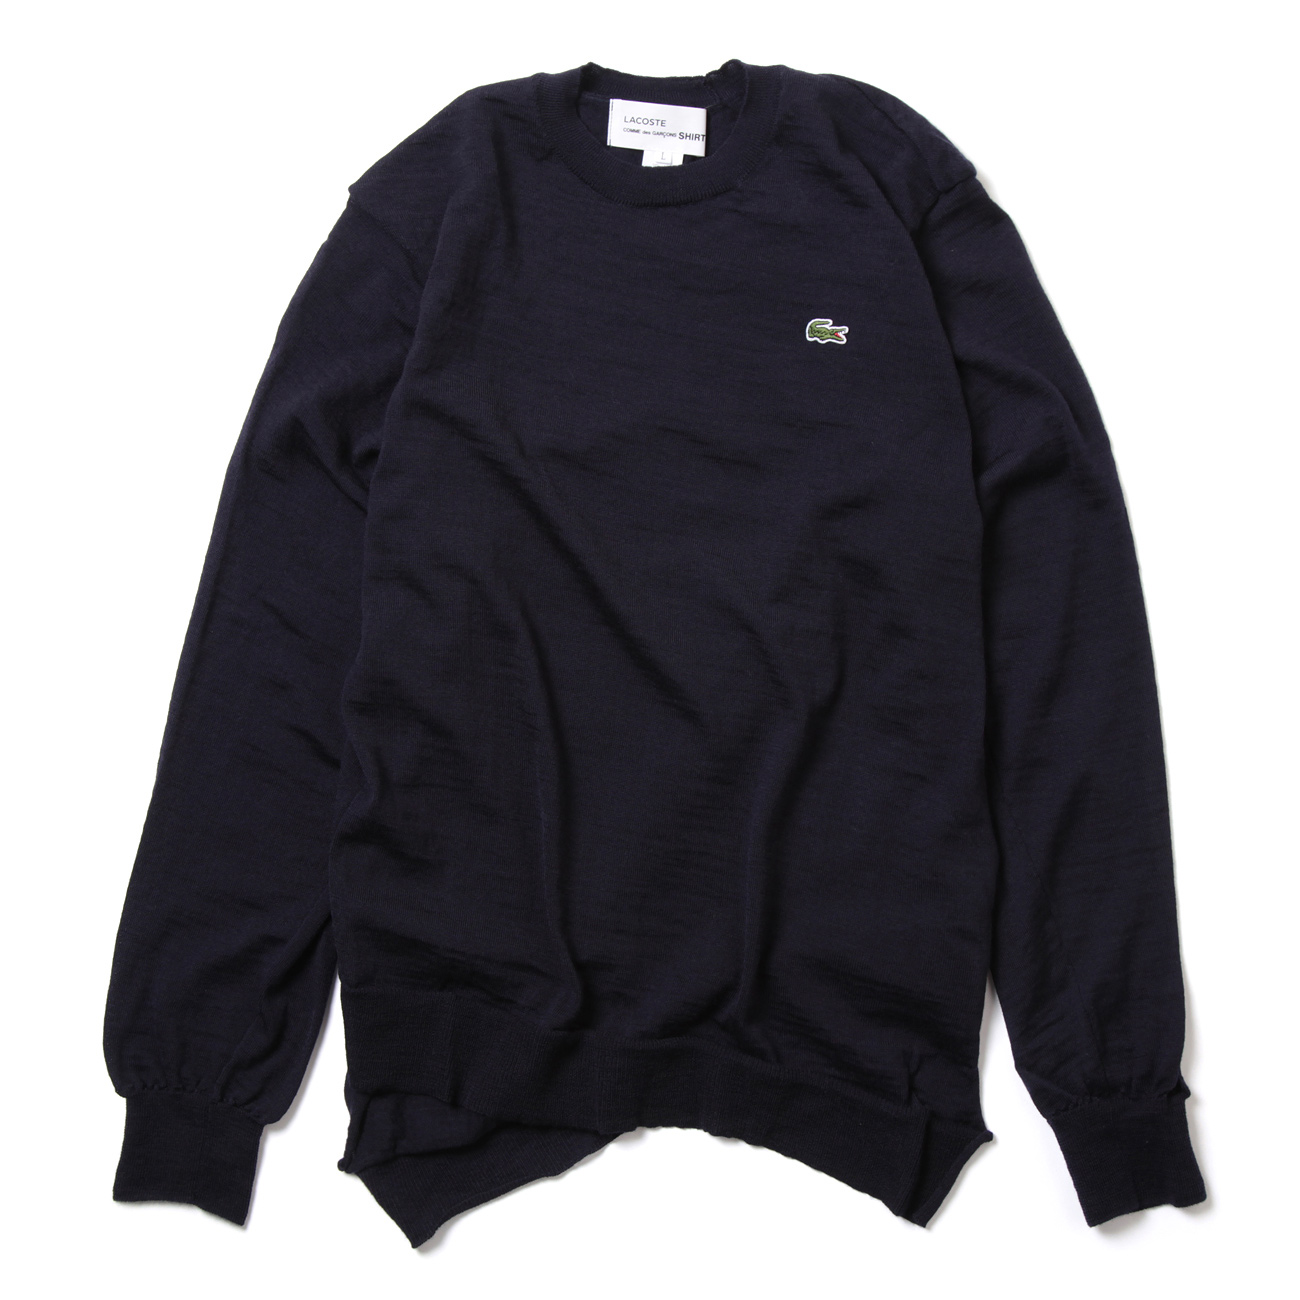 fully fashioned knit LACOSTE badge gauge 14 - Navy